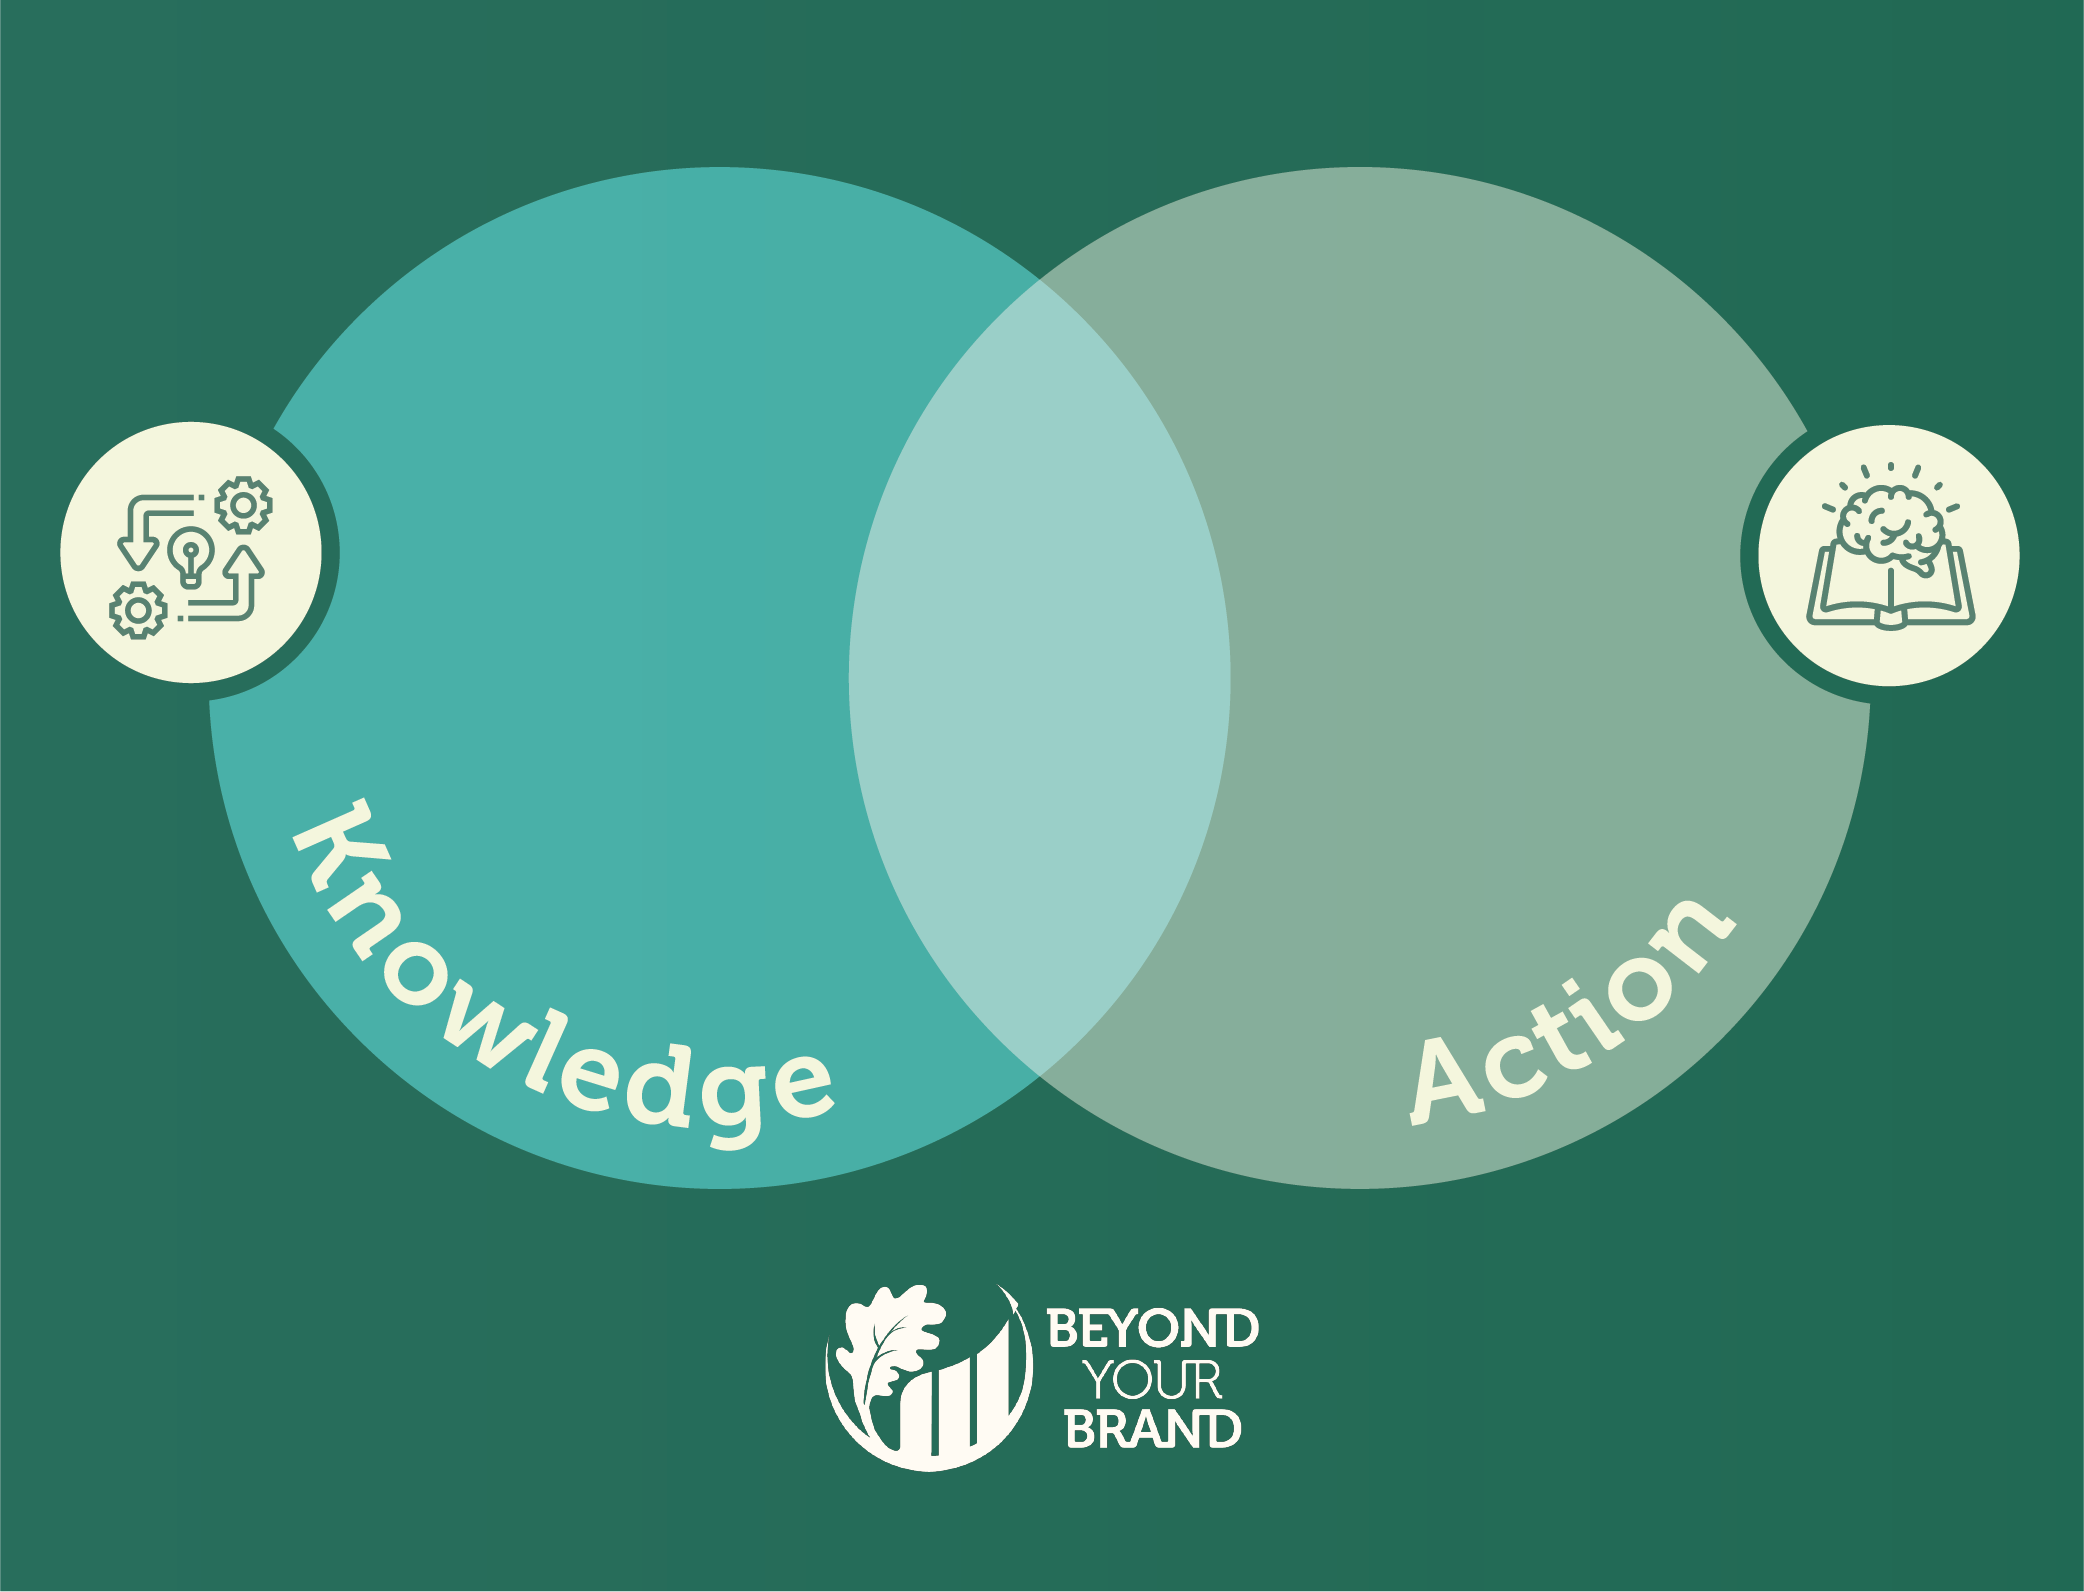 A venn diagram with 2 partially overlapping circles with "Knowledge" in the left circle and "Action" in the right circle